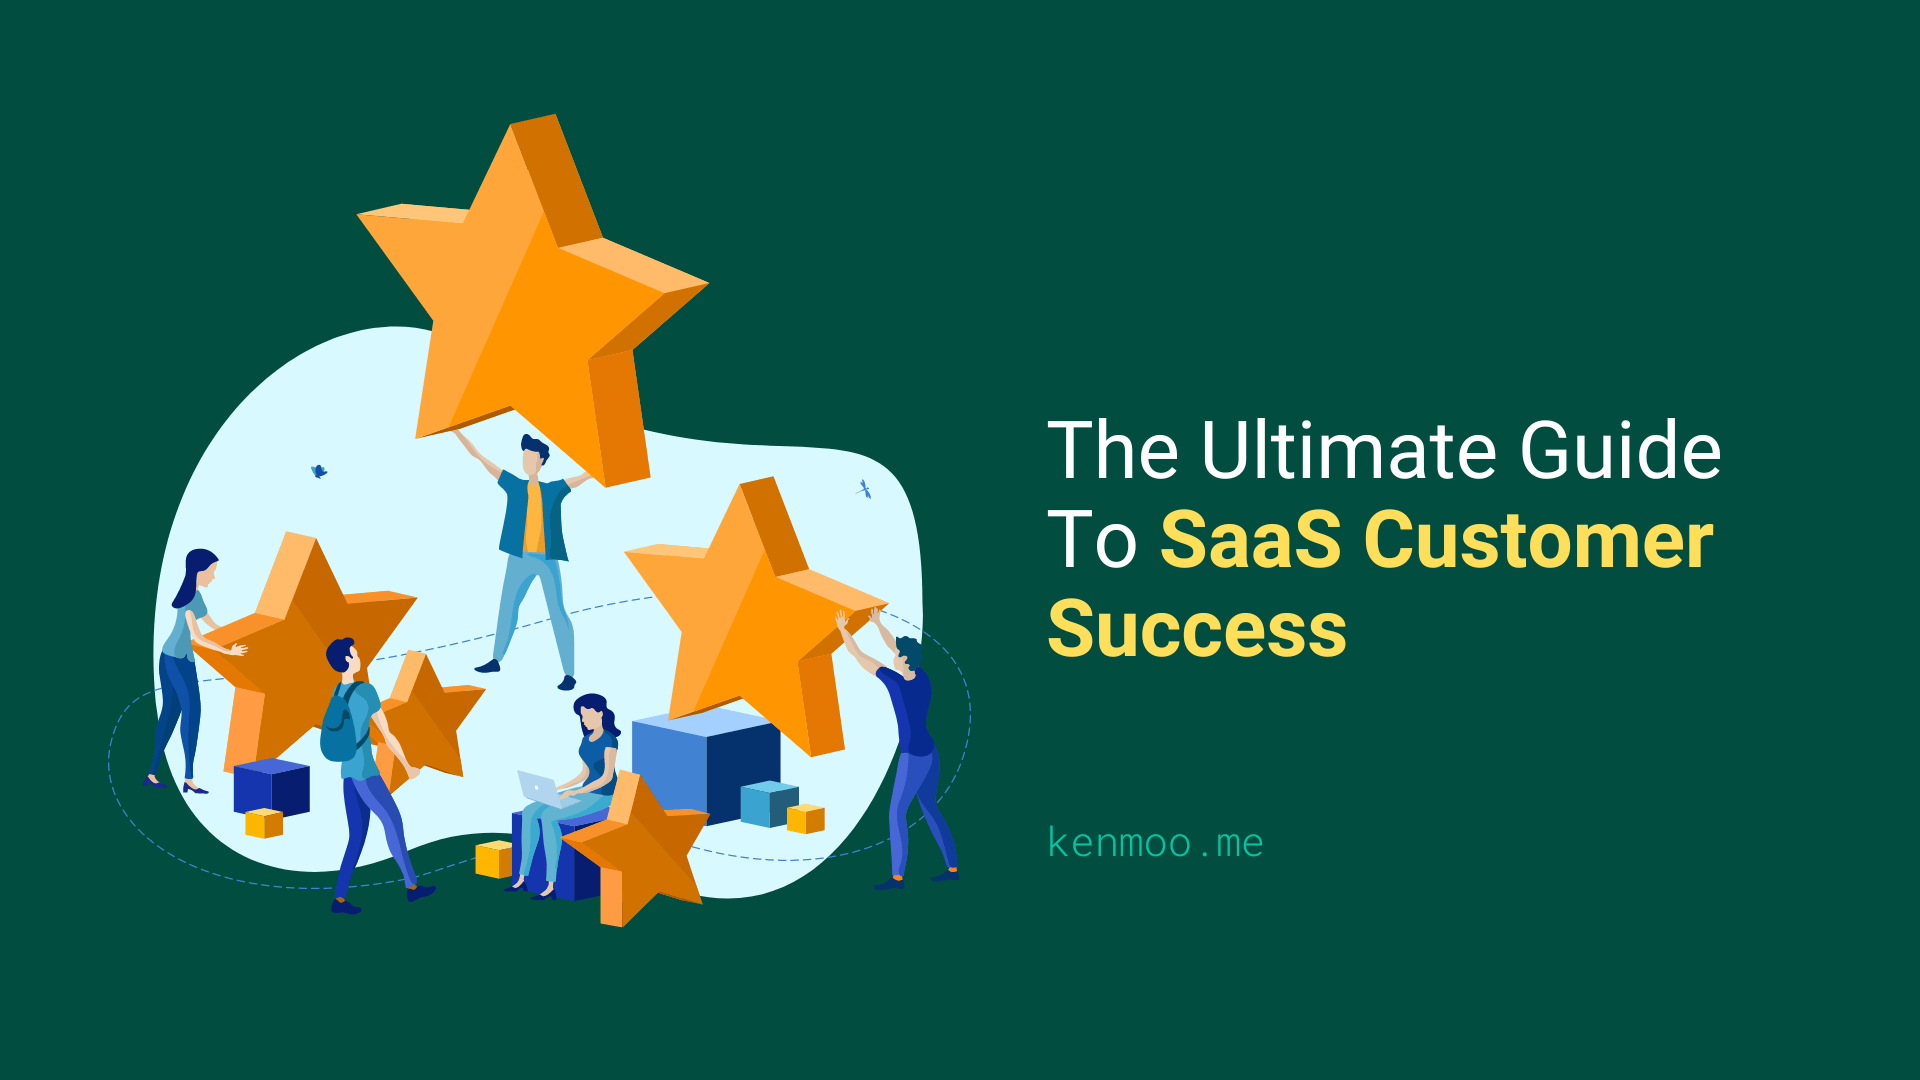 The Ultimate Guide To SaaS Customer Success